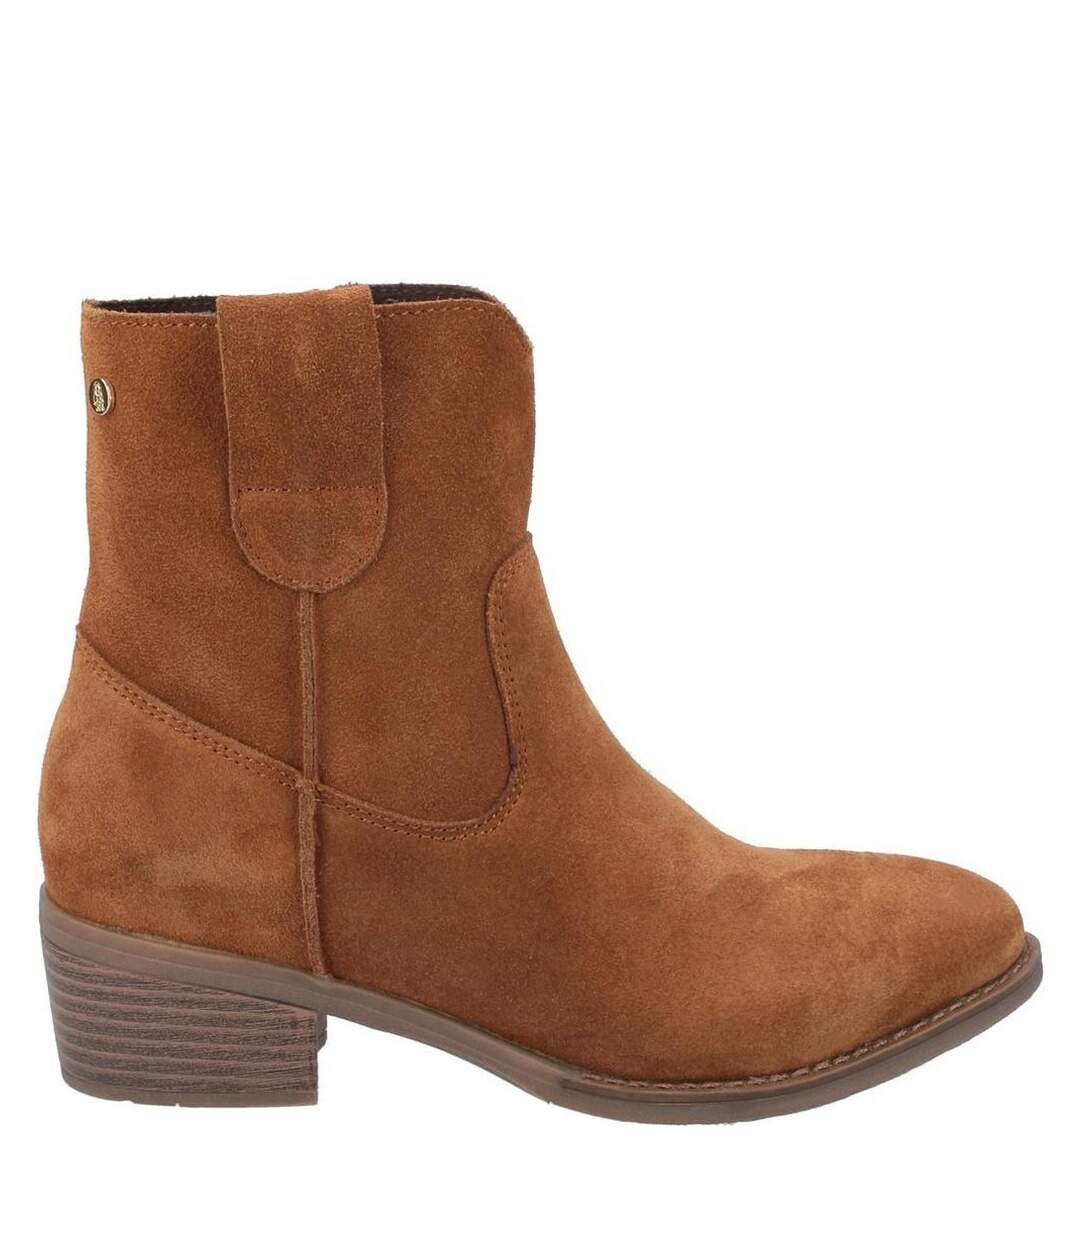 Hush Puppies Womens/Ladies Iva Suede Ankle Boots (Tan) - UTFS8390